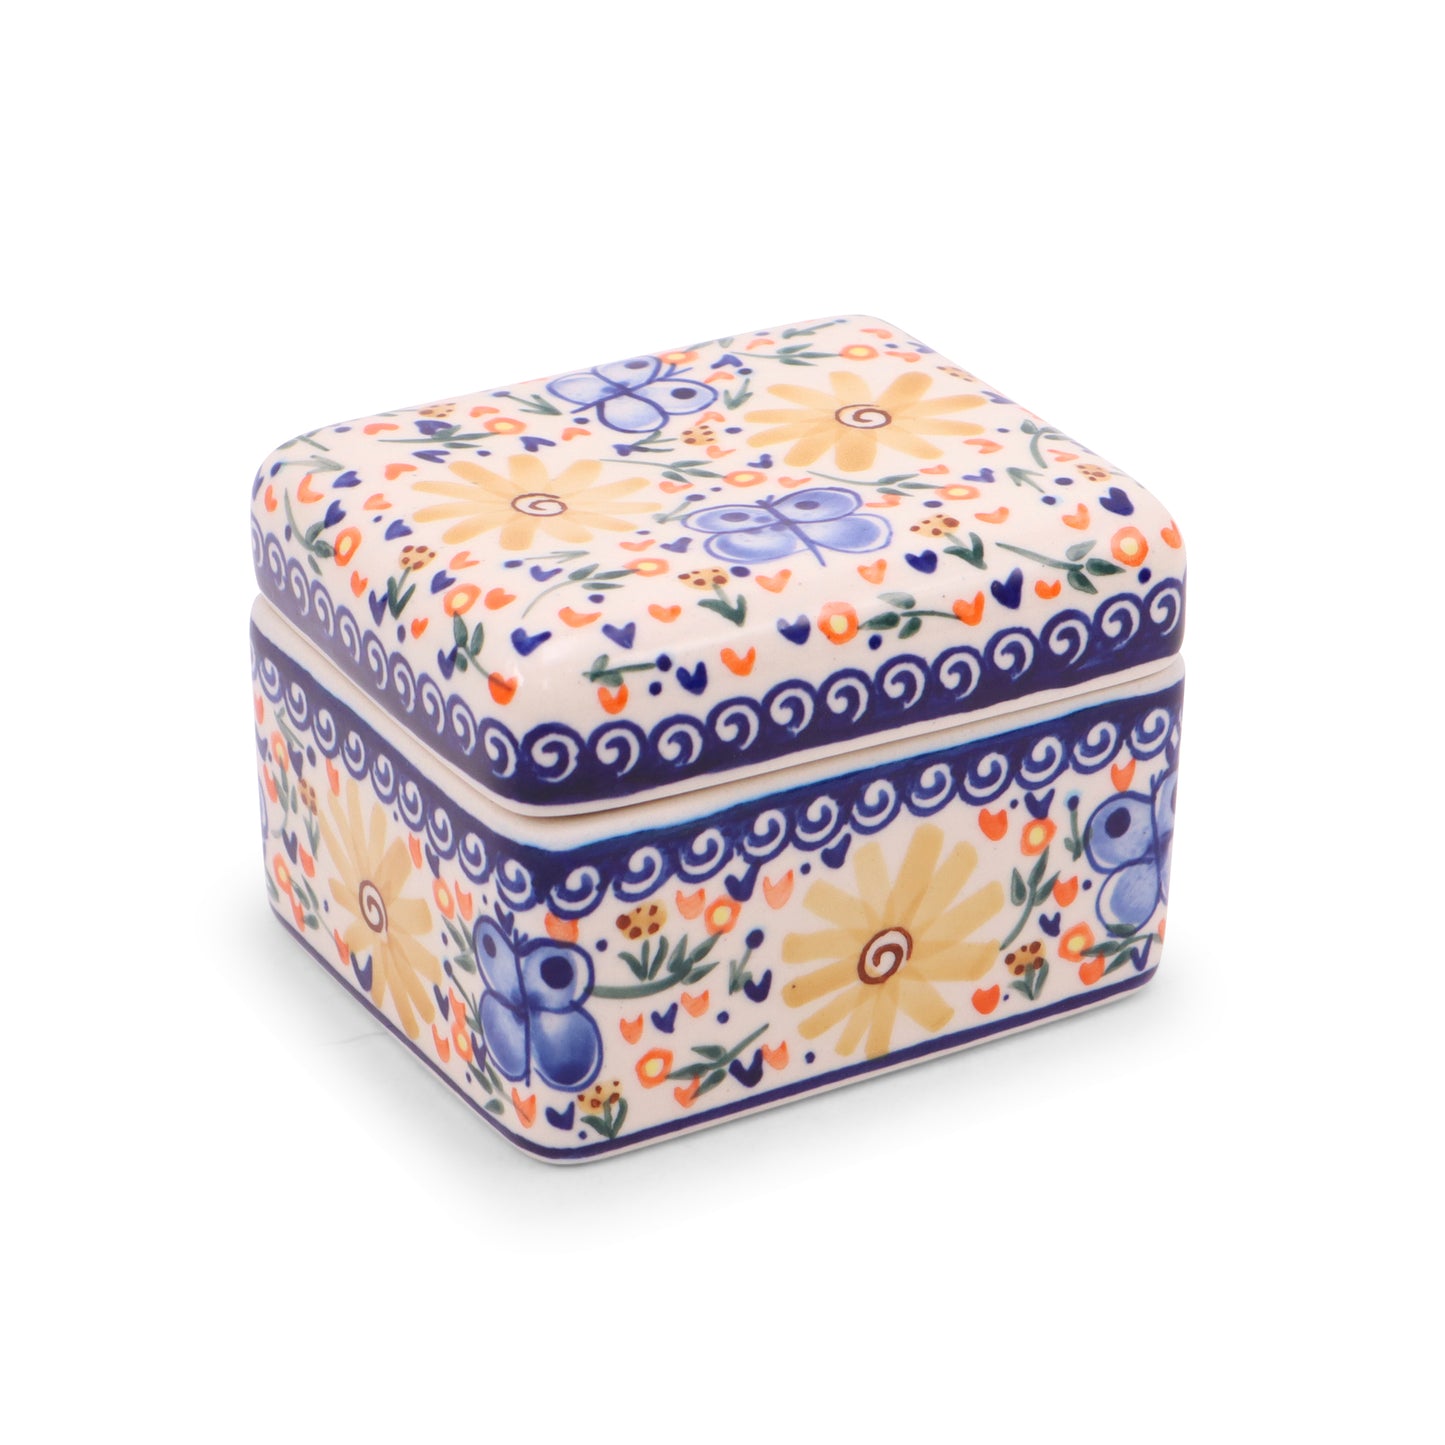 4.5"x4"x3.5" Box with Lid. Pattern: Butterfly Dance